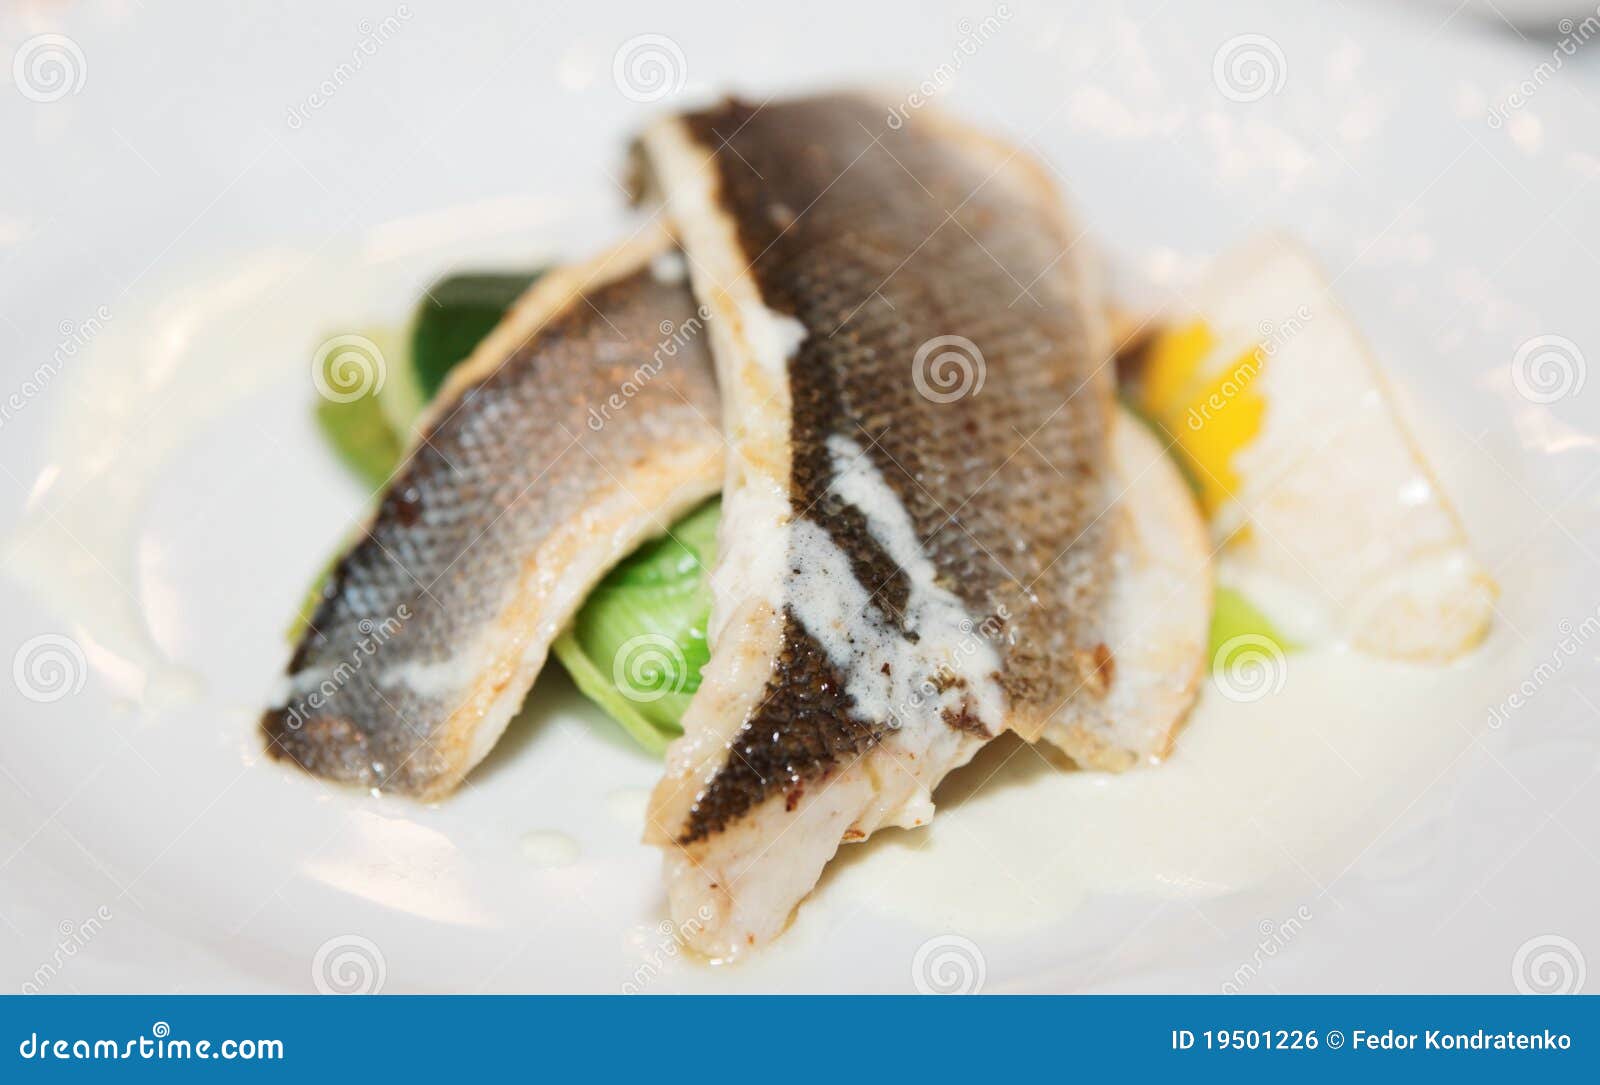 Boiled seabass with steamed vegetables - healthy meal